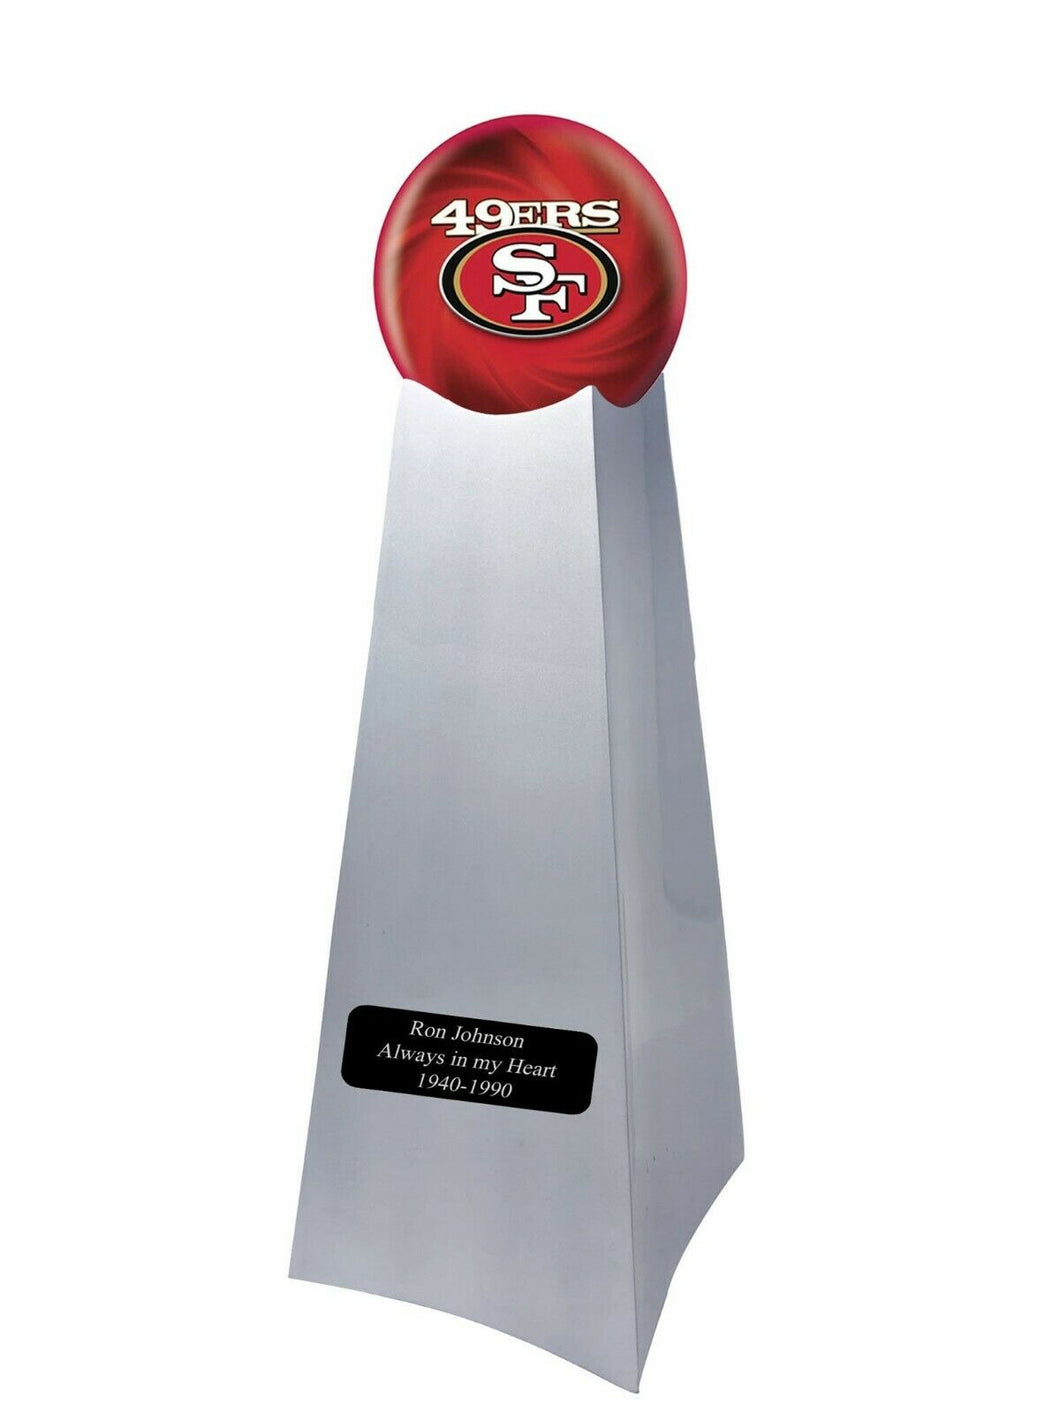 San Francisco 49ers Football Championship Trophy Large/Adult Cremation Urn 200 Cubic Inches